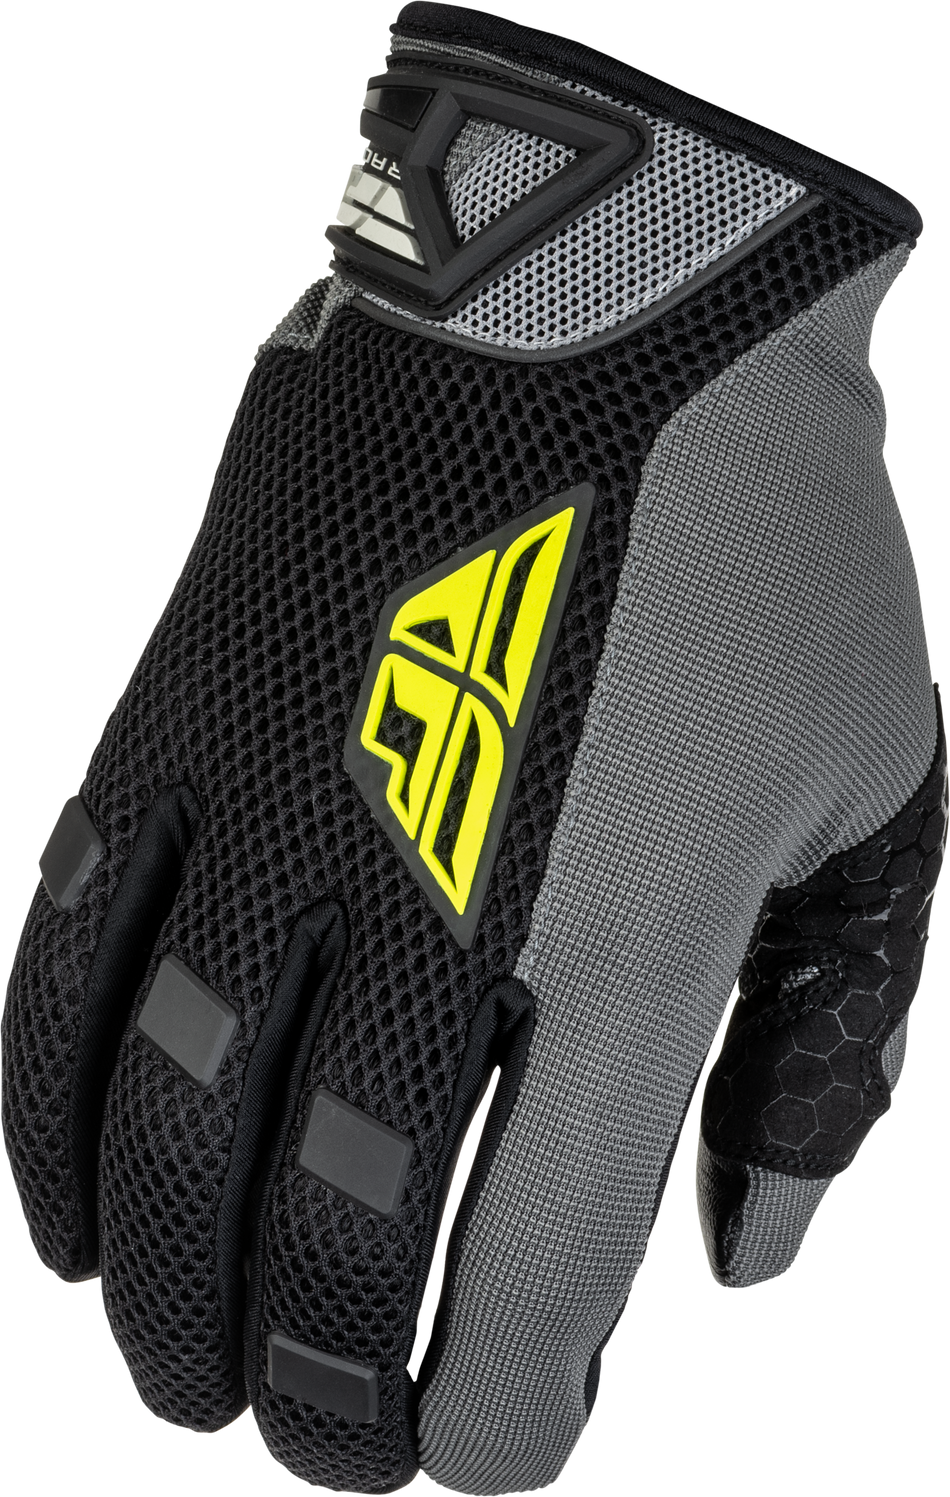 FLY RACING Coolpro Gloves Black/Hi-Vis Xs 476-4027XS